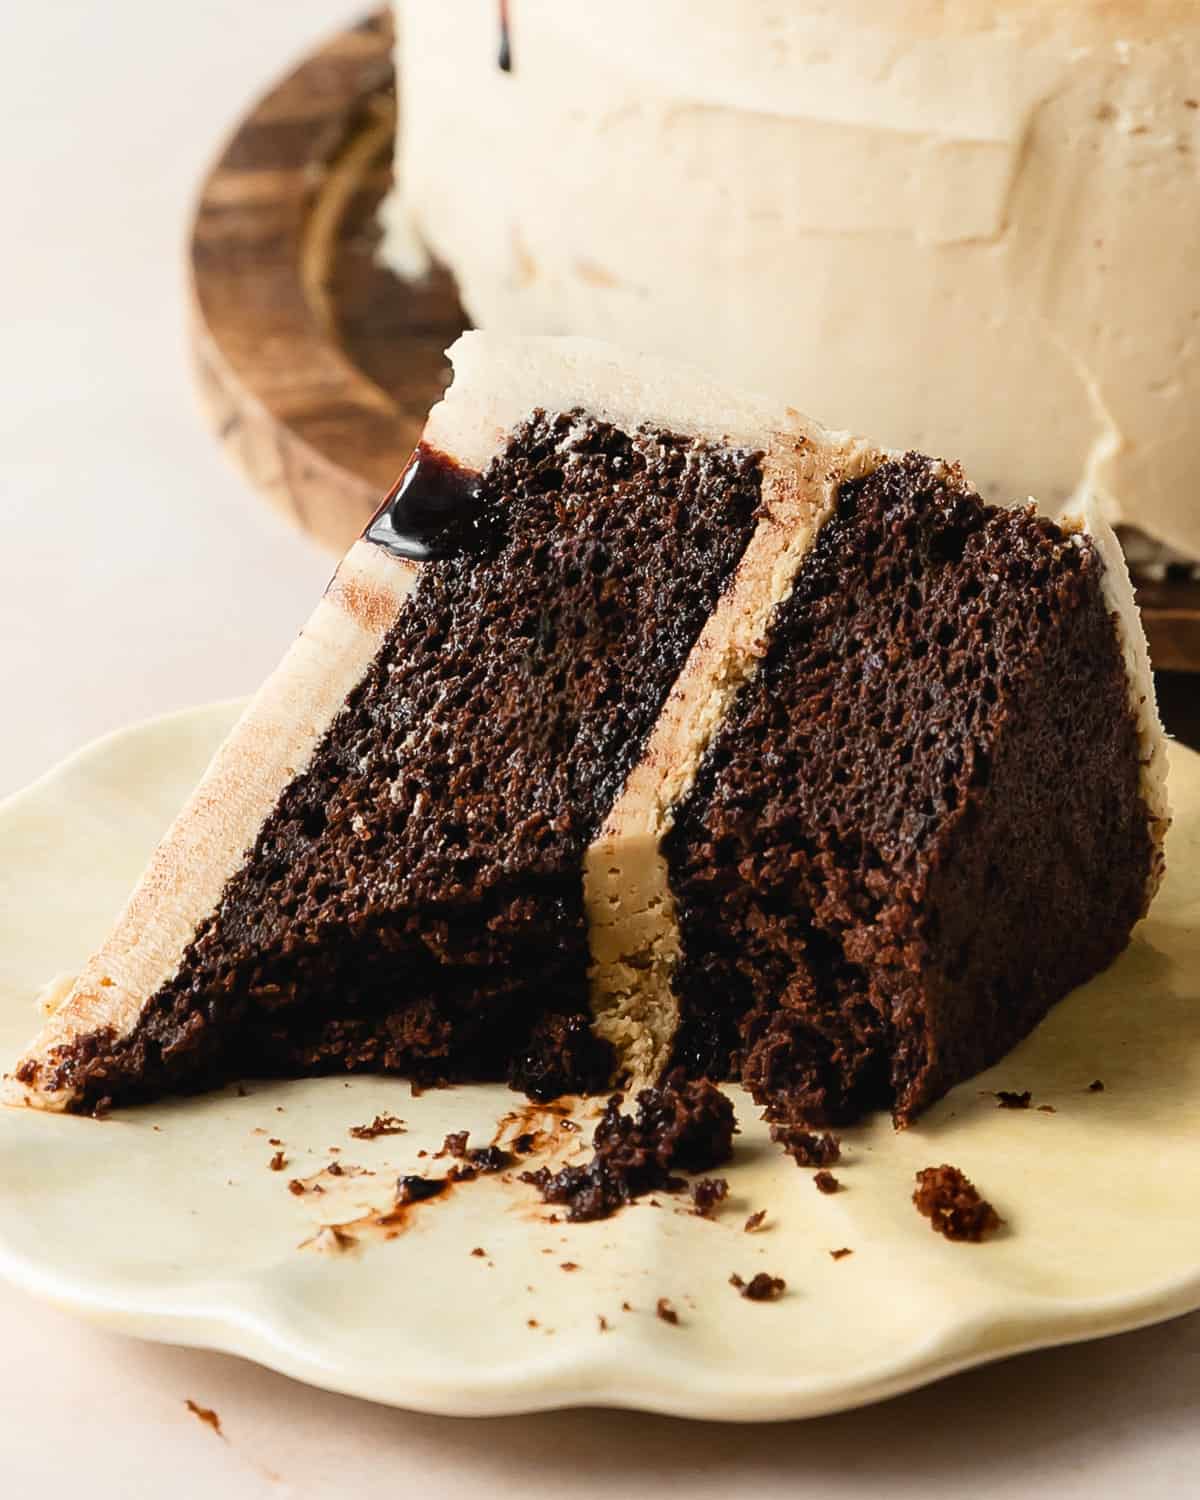 Chocolate coffee cake is a moist espresso chocolate cake infused with a sweet simple coffee syrup, layered with a creamy coffee buttercream. Drizzle the top of this layered coffee cake with extra coffee syrup for even more coffee flavor. This decadent and bakery worthy chocolate cake  is super simple to make and is perfect for any celebration.